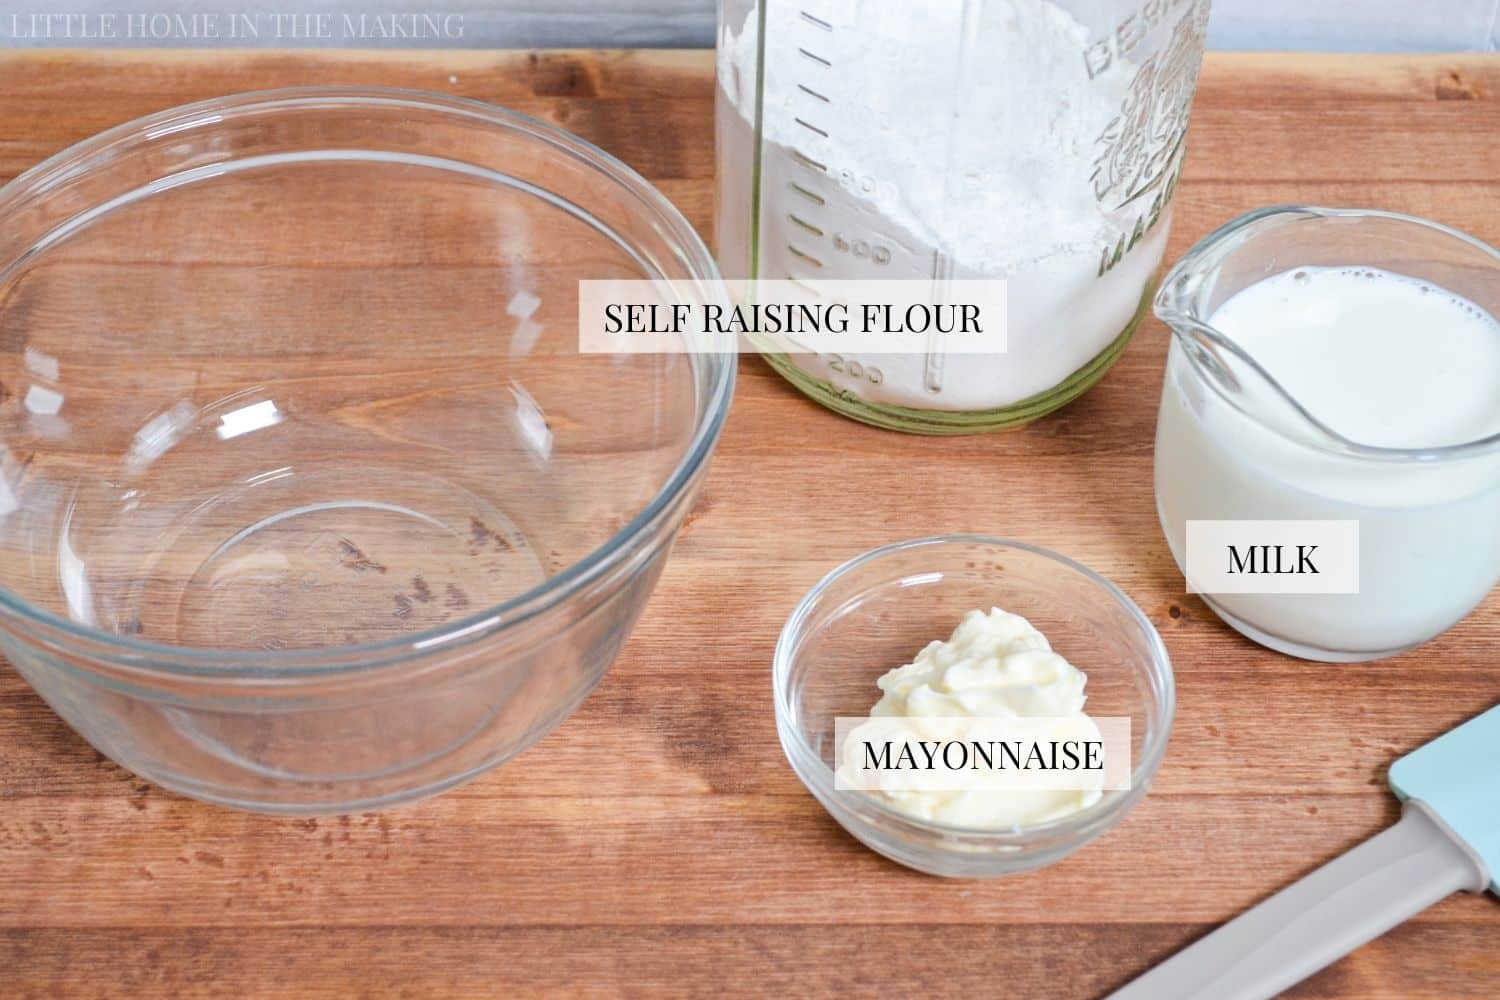 The ingredients needed to make mayonnaise rolls.